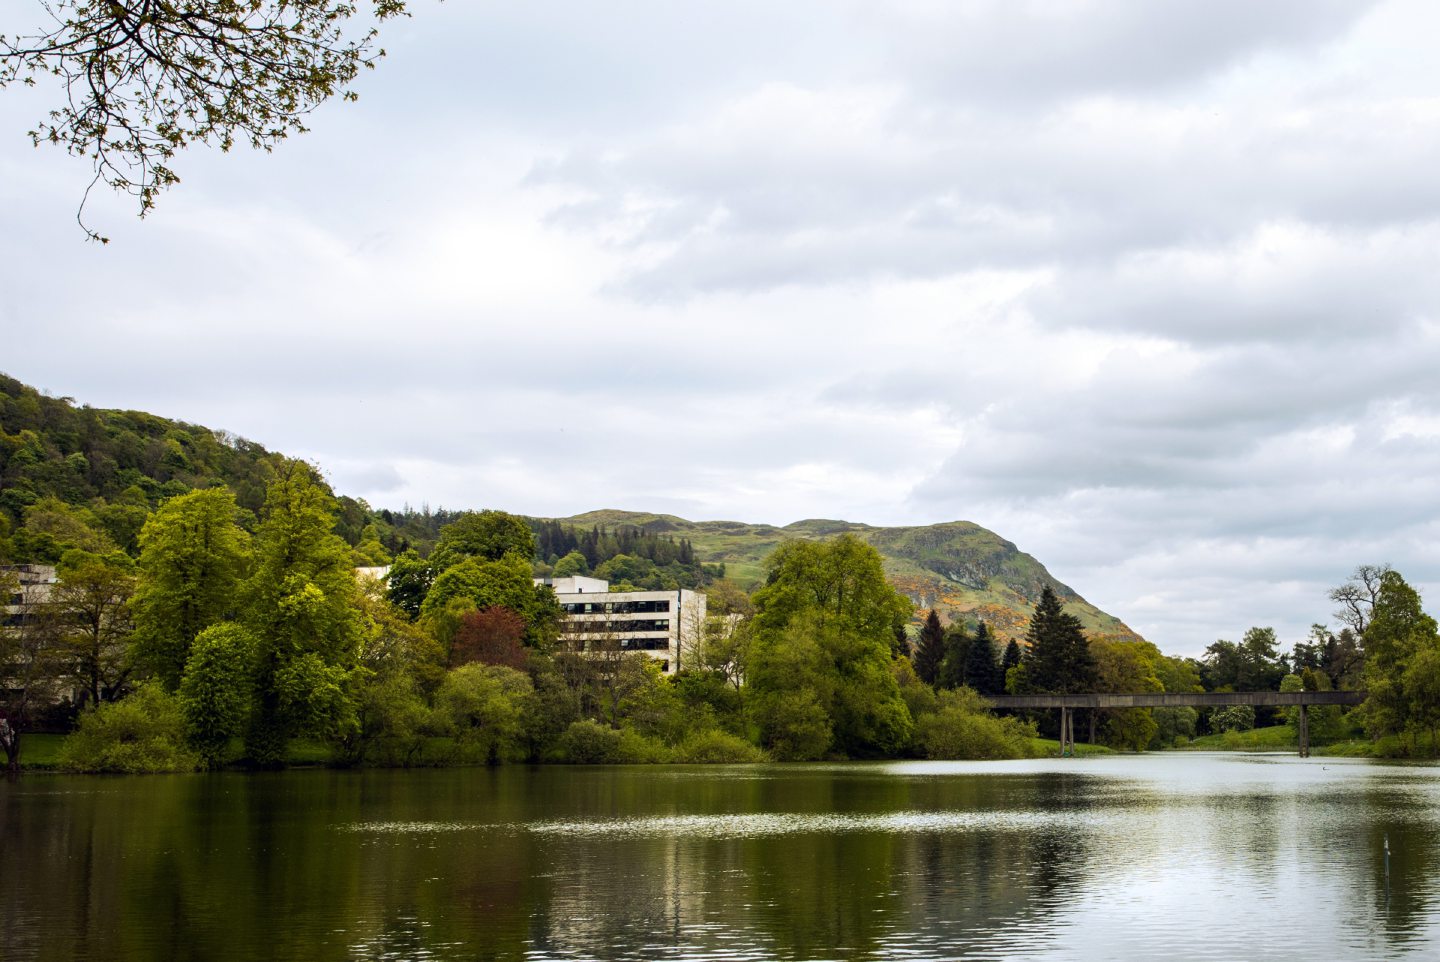 The view of Dumyat from the Stirling University grounds.